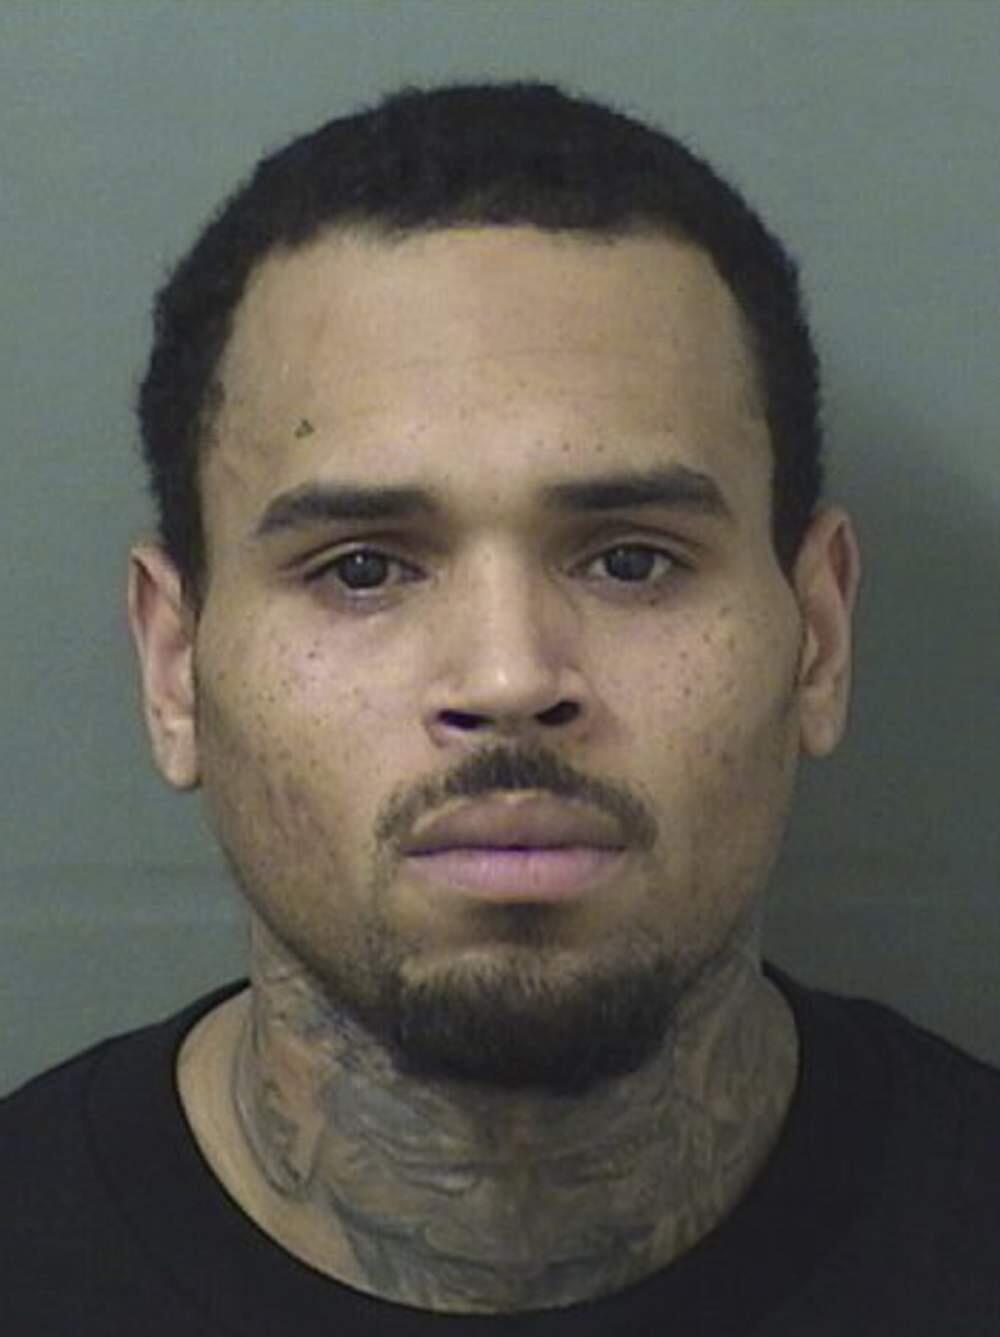 This booking photo provided by Balm Beach County Sheriff's Office shows Chris Brown. The singer walked off stage after his concert in Florida and into the hands of waiting sheriff's deputies, who arrested him on a felony battery charge and booked him into the Palm Beach County Jail. A sheriff's spokeswoman said the entertainer was released after posting $2,000 bond on the battery charge issued by the sheriff's office in Hillsborough County. (Balm Beach County Sheriff's Office via AP)